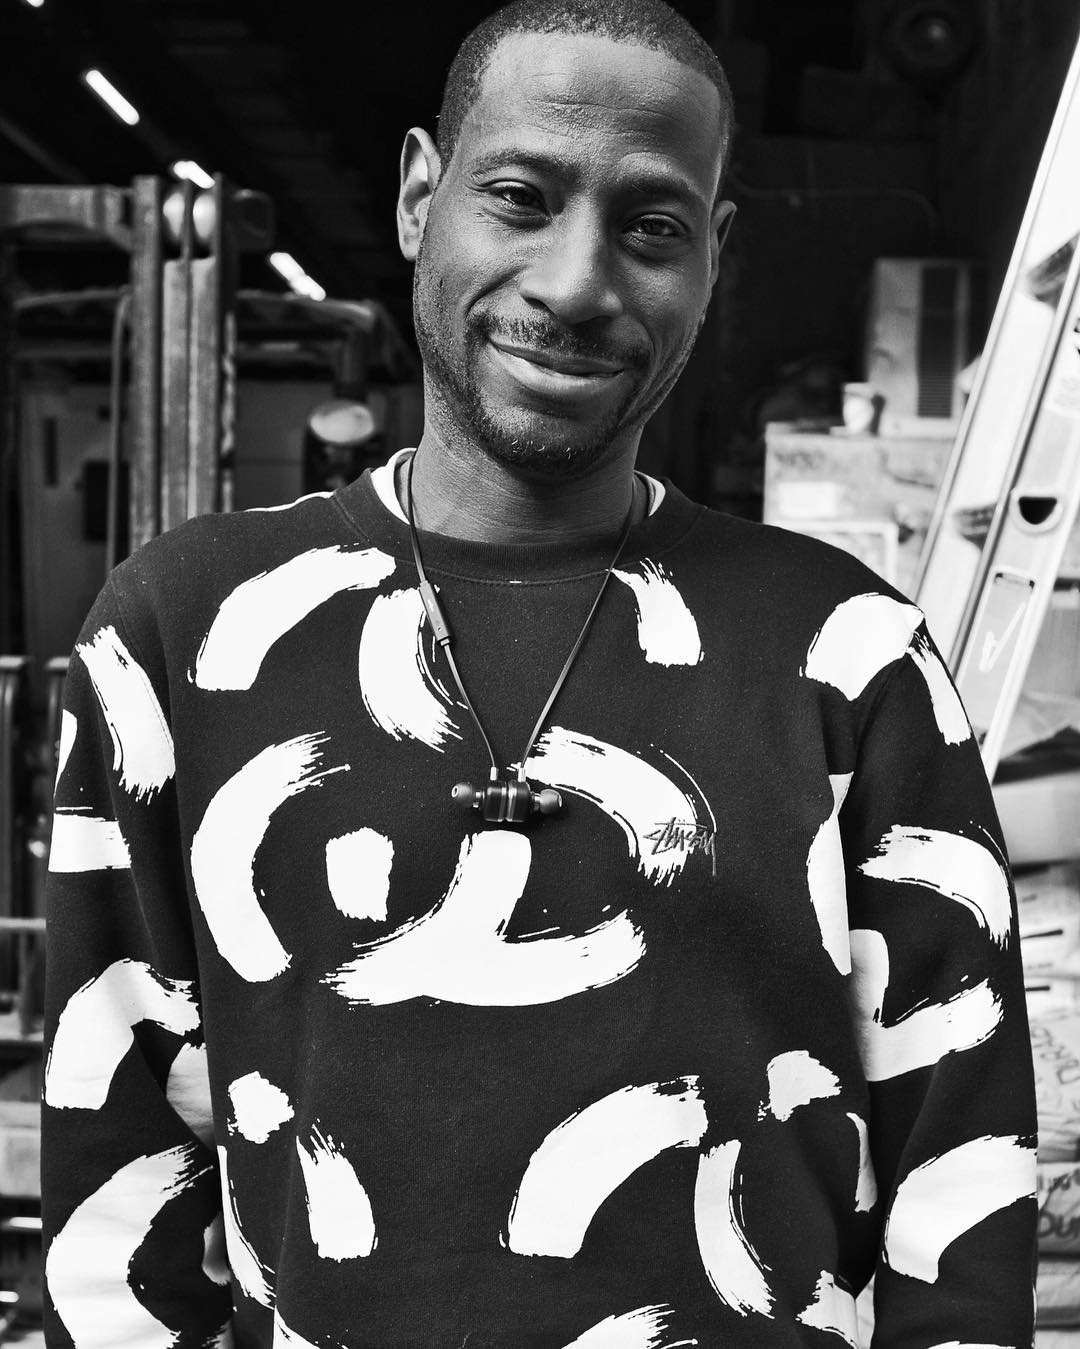 TJ was working in SOHO and he let me take a picture. I loved his bold graphic sweater. How is your day going: Well I